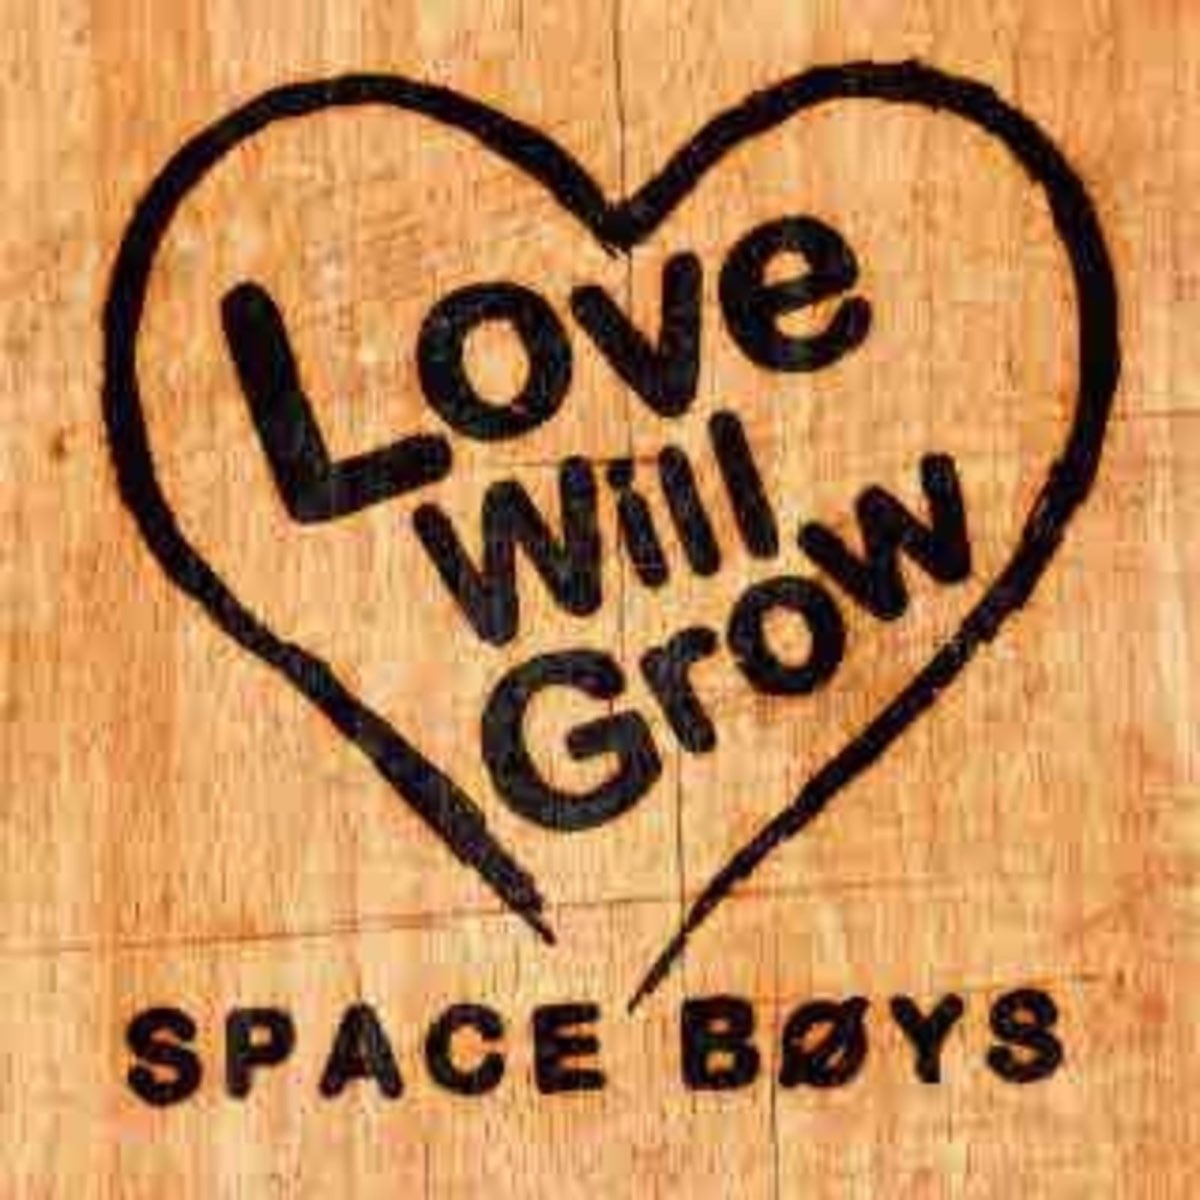 Boy topic. Will grow. Space boys Love will grow. Space boys ship. My name is Space.